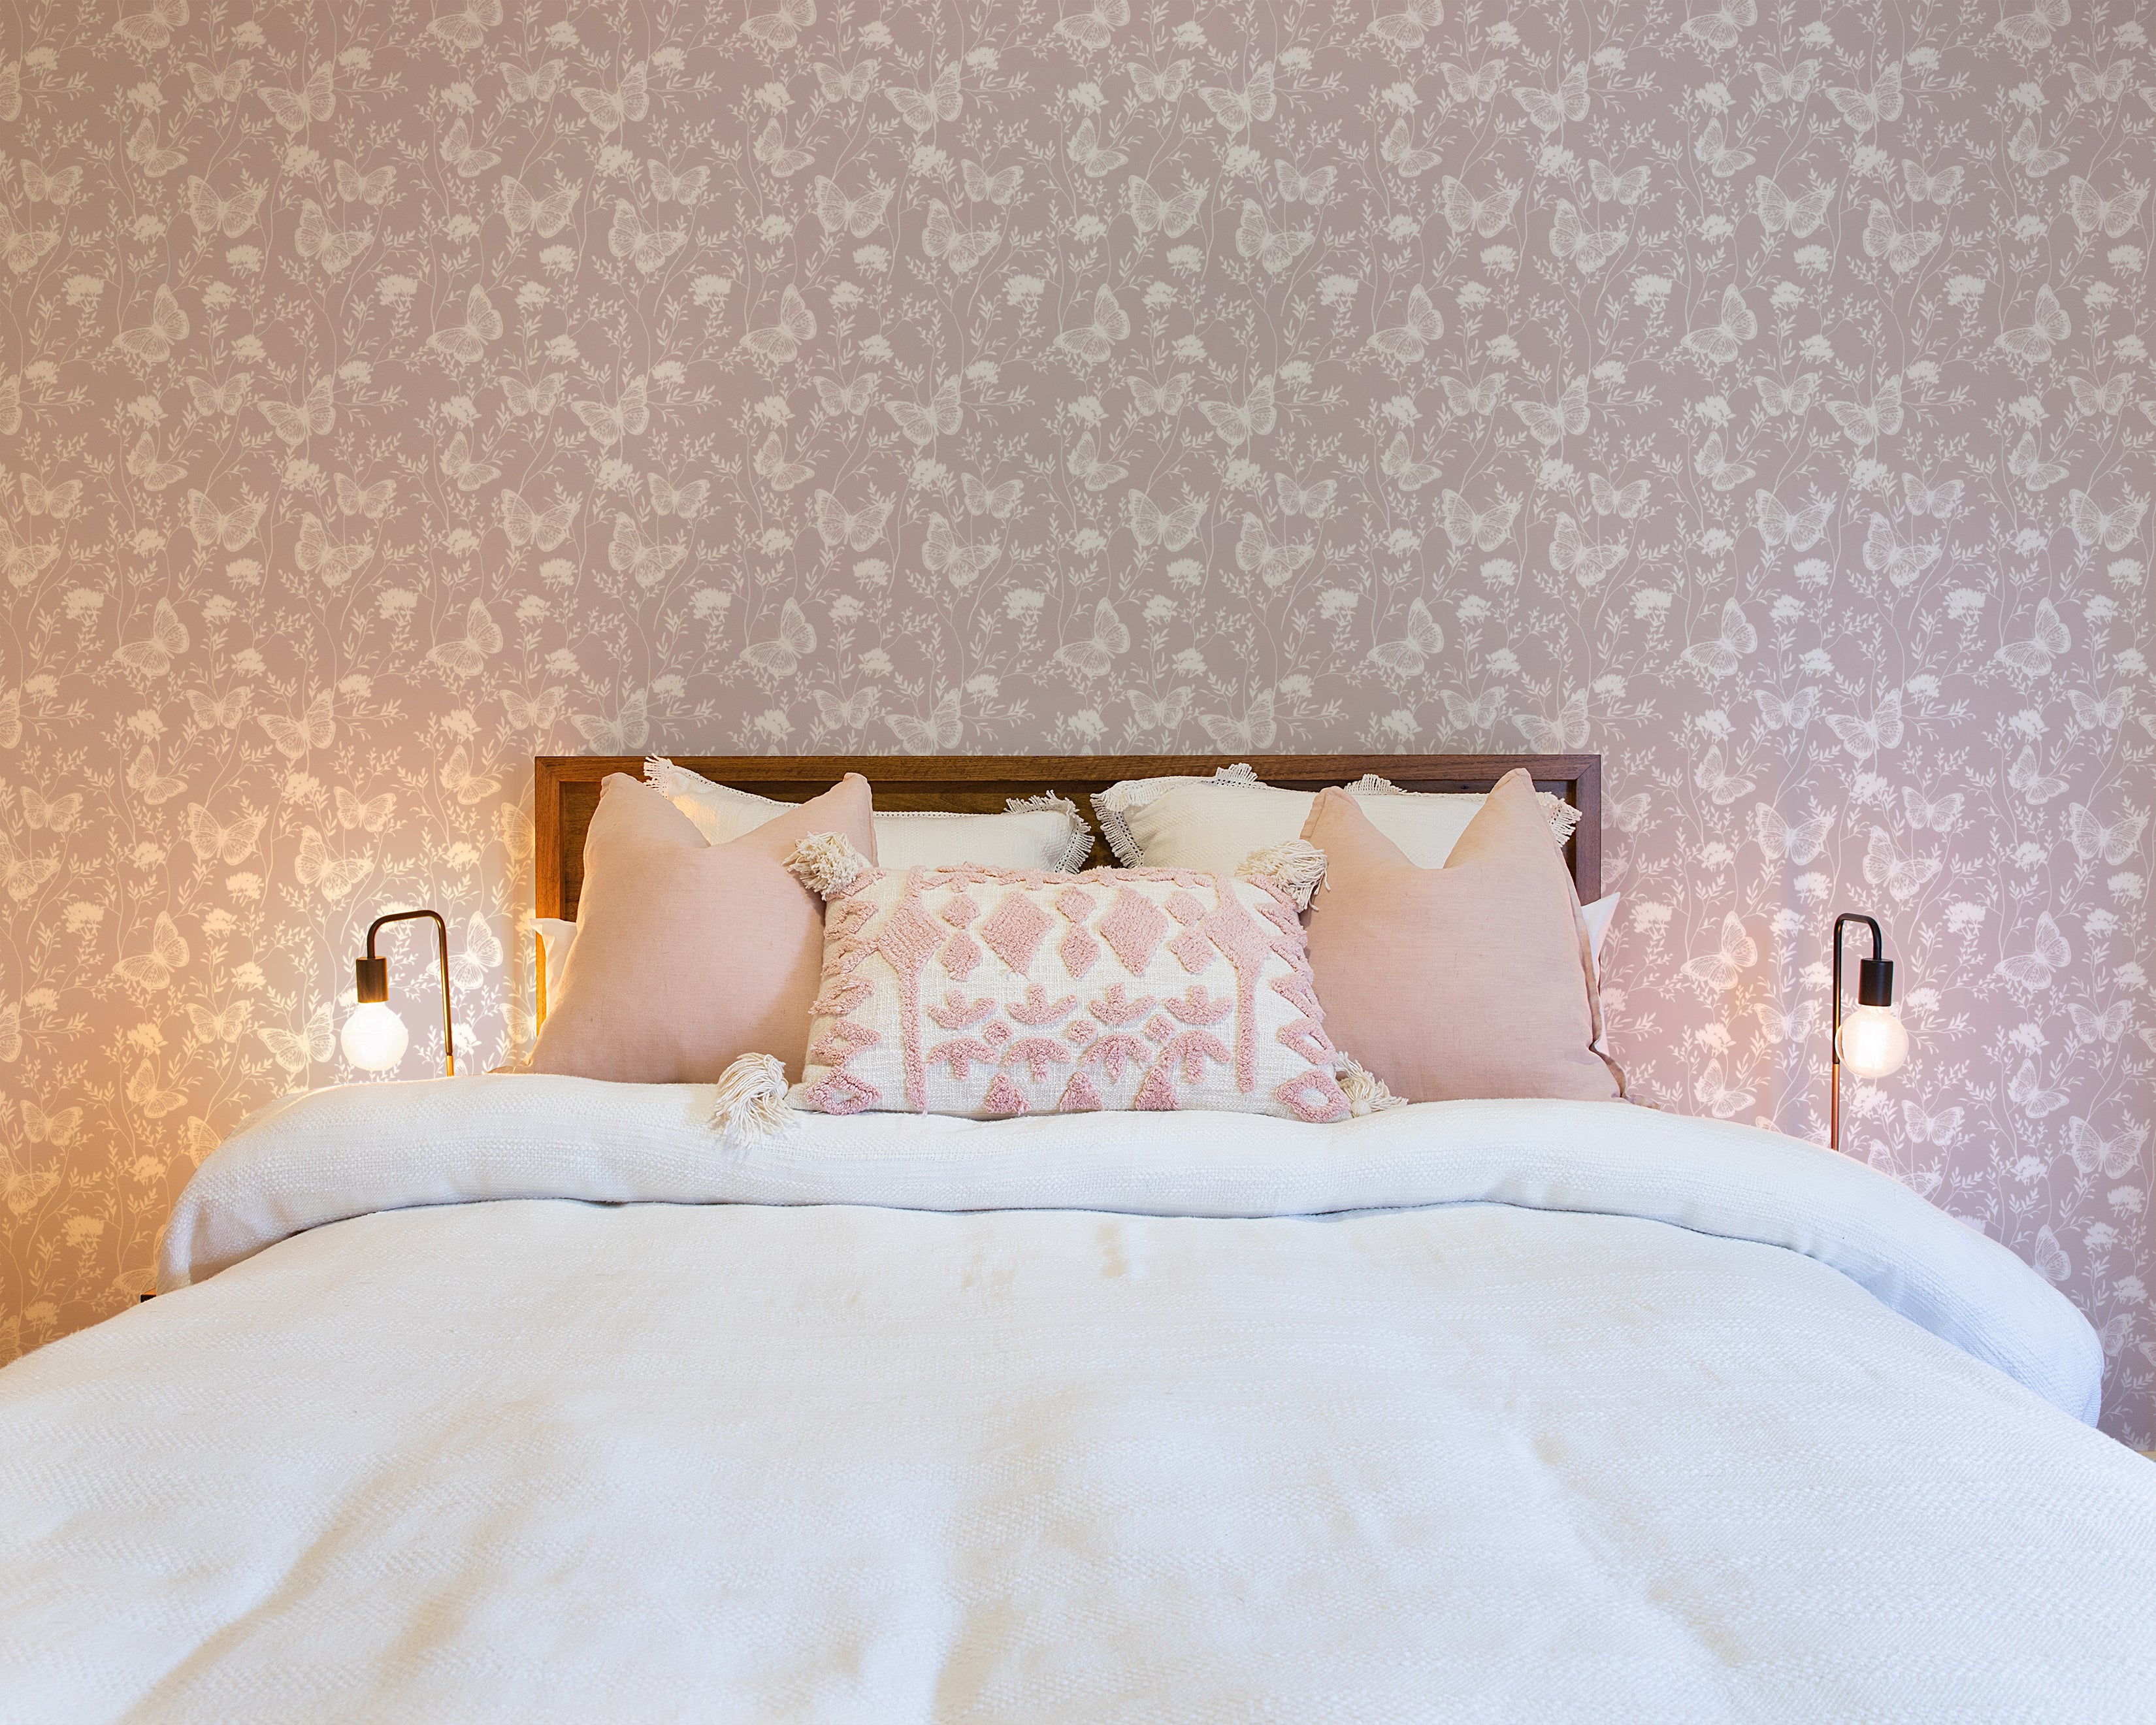 the "Whimsical Wings Wallpaper" in a warmly lit bedroom. A stylish bedside table with a minimalist lamp showcases the gentle butterfly pattern on the wallpaper, pairing beautifully with the room's neutral and pastel color scheme for a peaceful sleeping space.